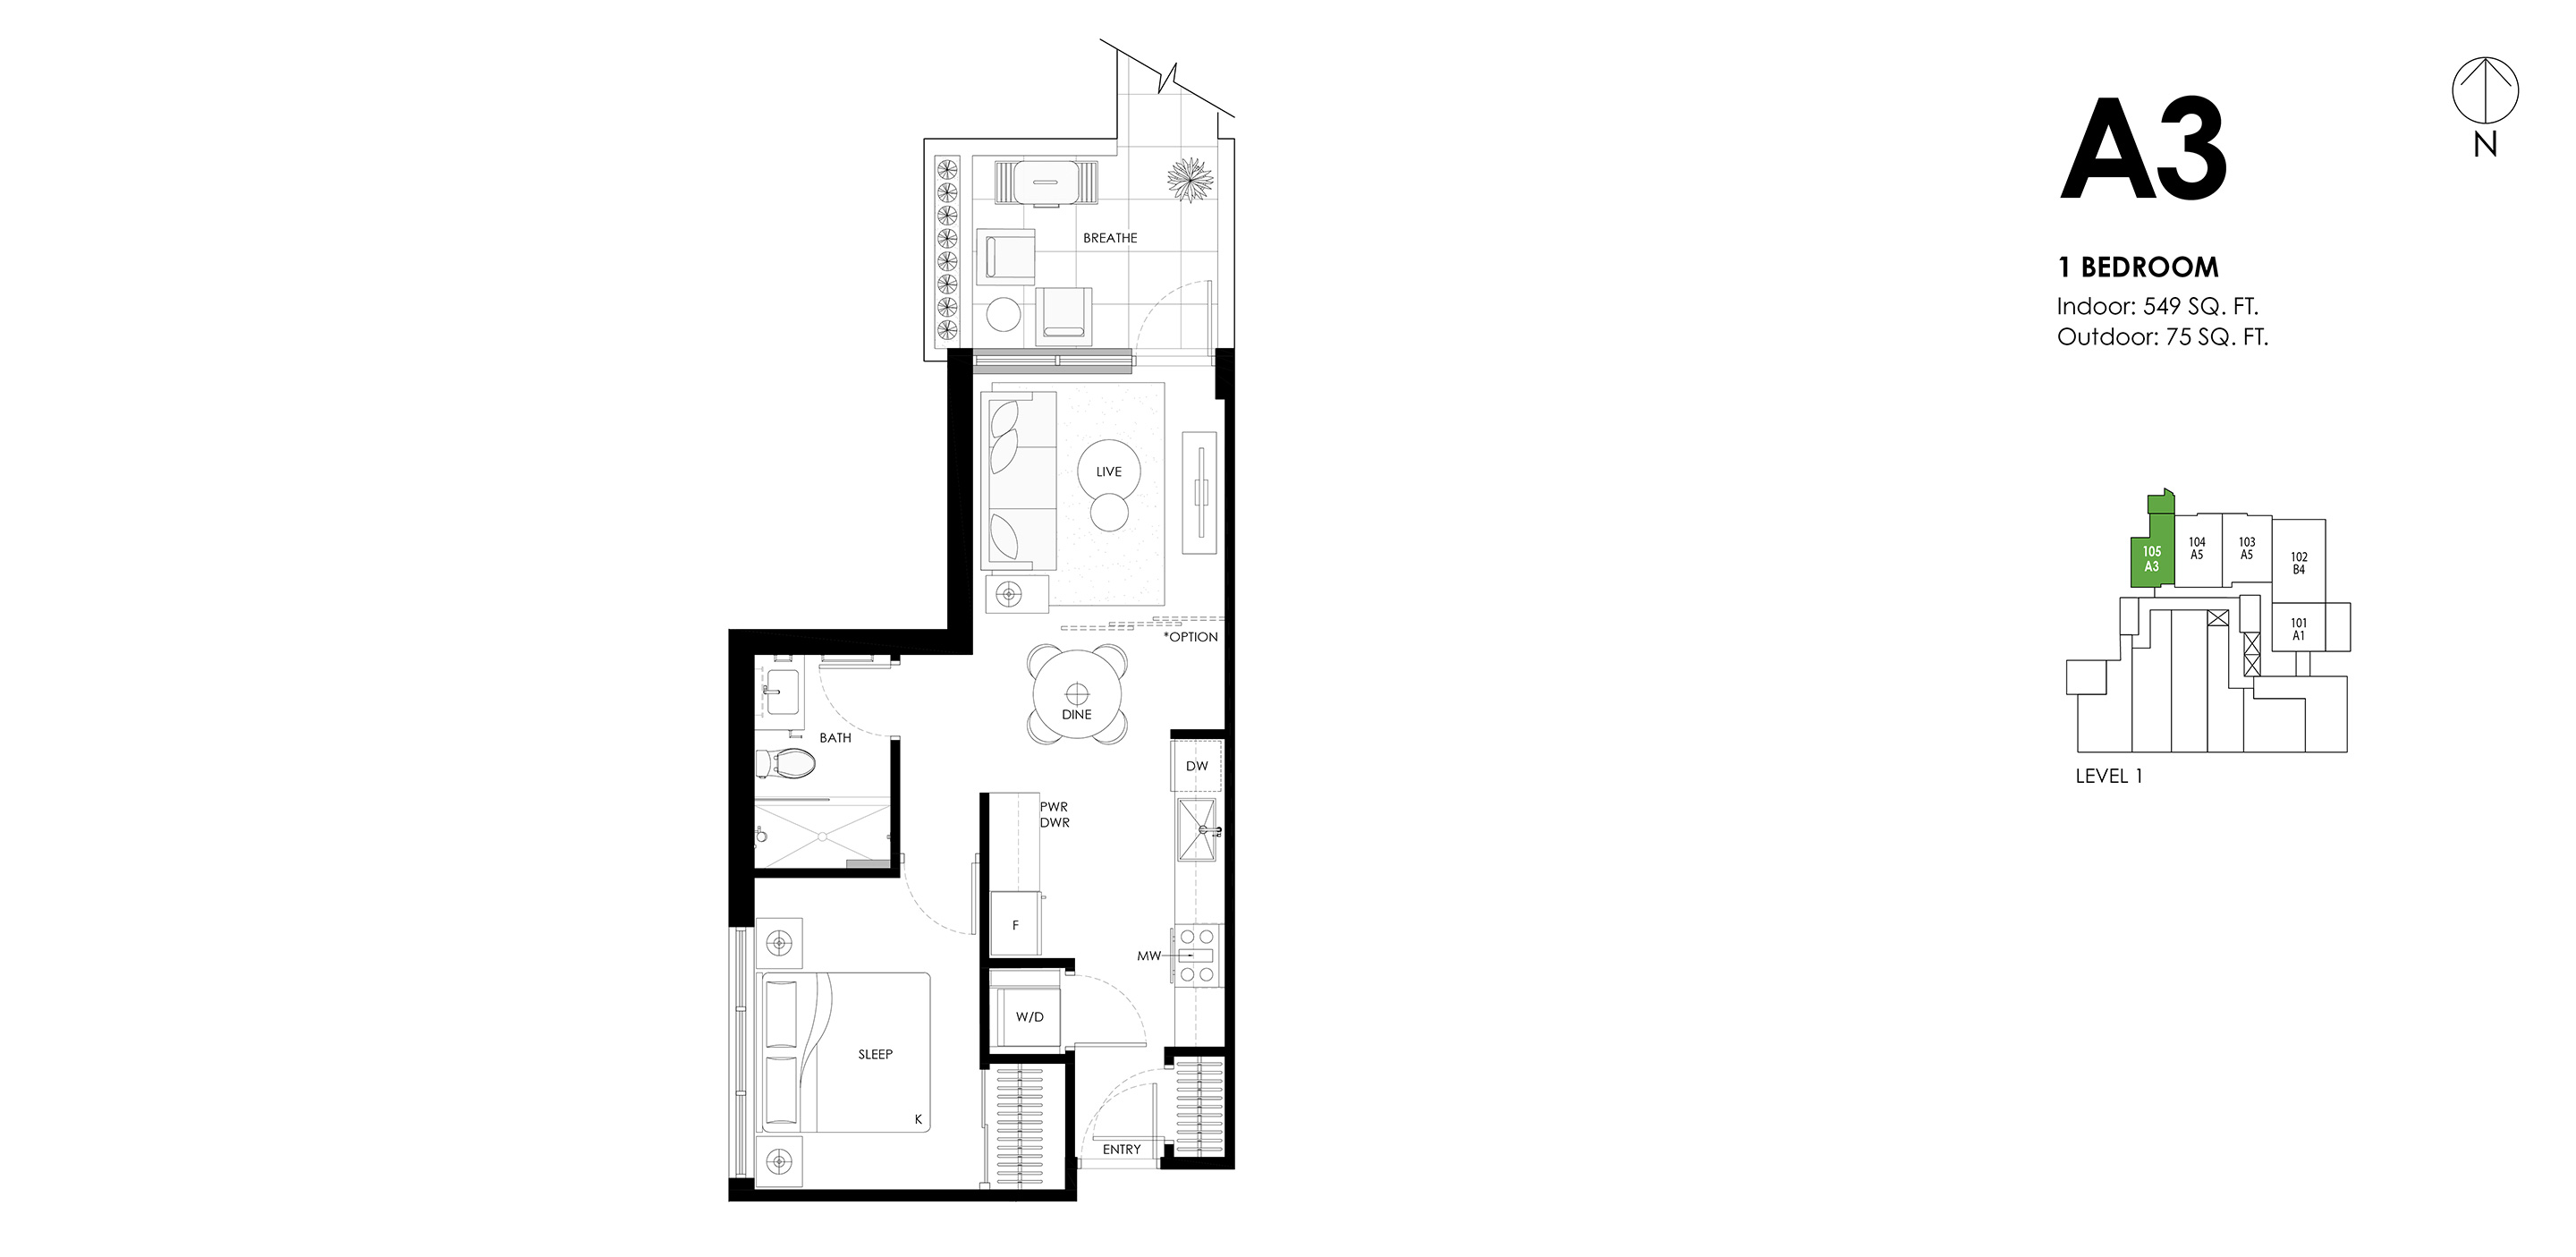 A3 Floor Plan of Ava Condos with undefined beds